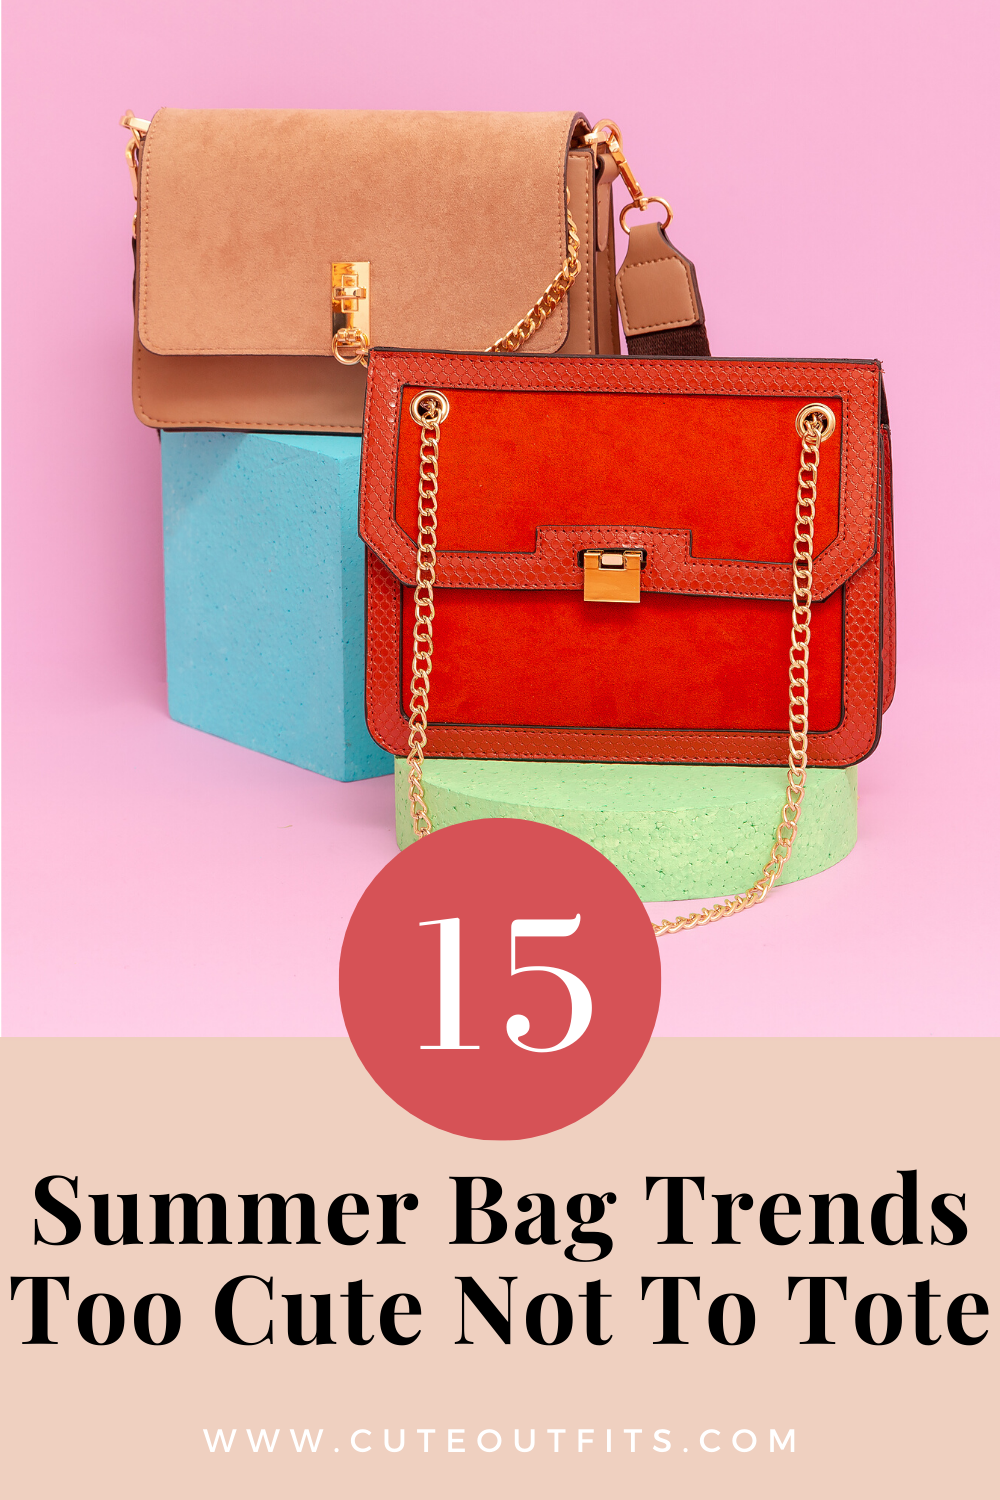 placard | Summer Bag Trends Too Cute Not To Tote